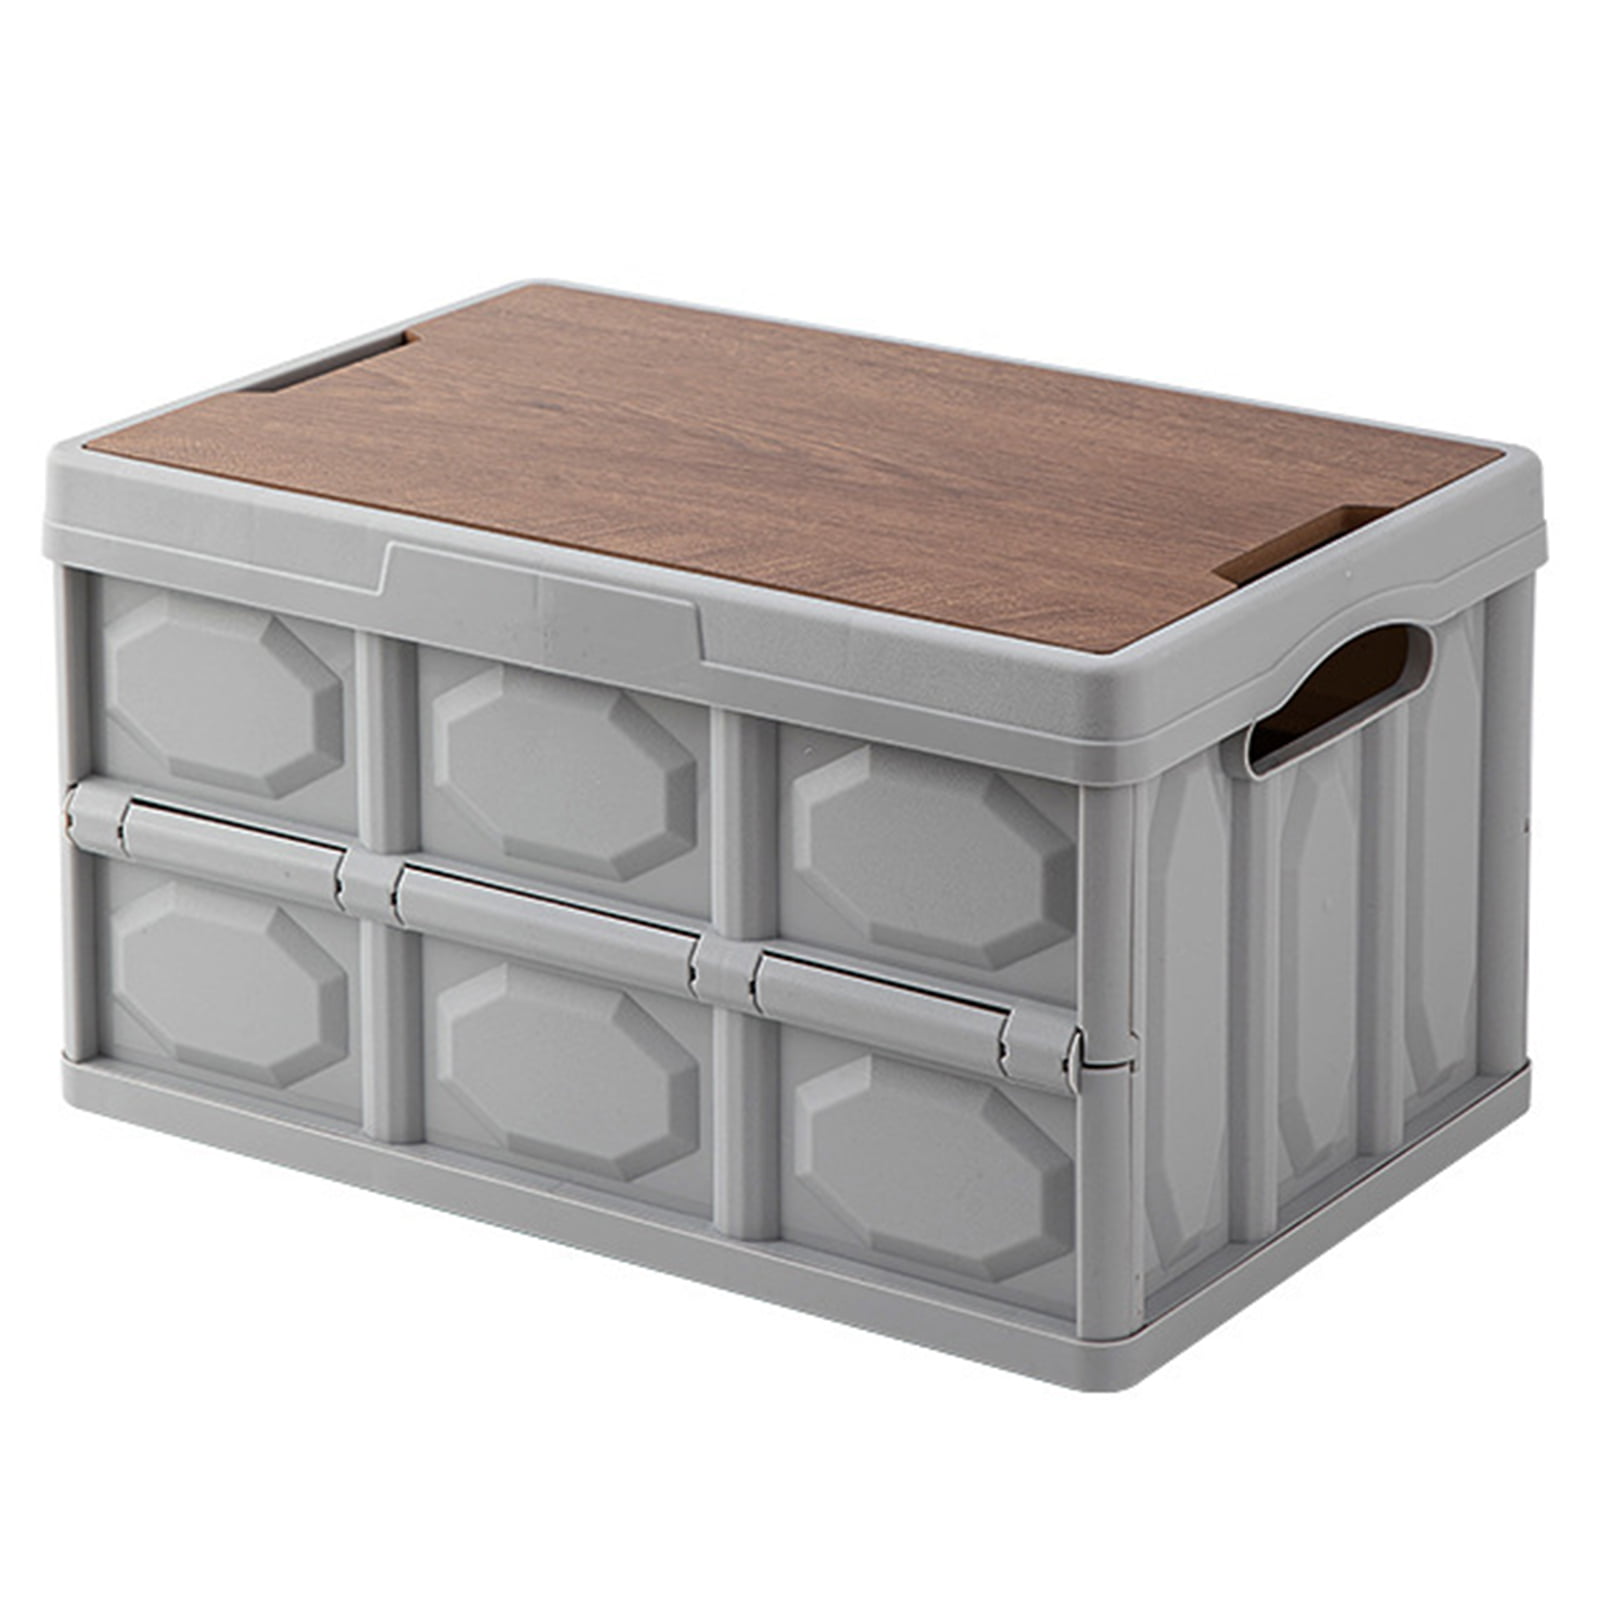 Portable Storage Table Top collapsible / Foldable Crate / Box for